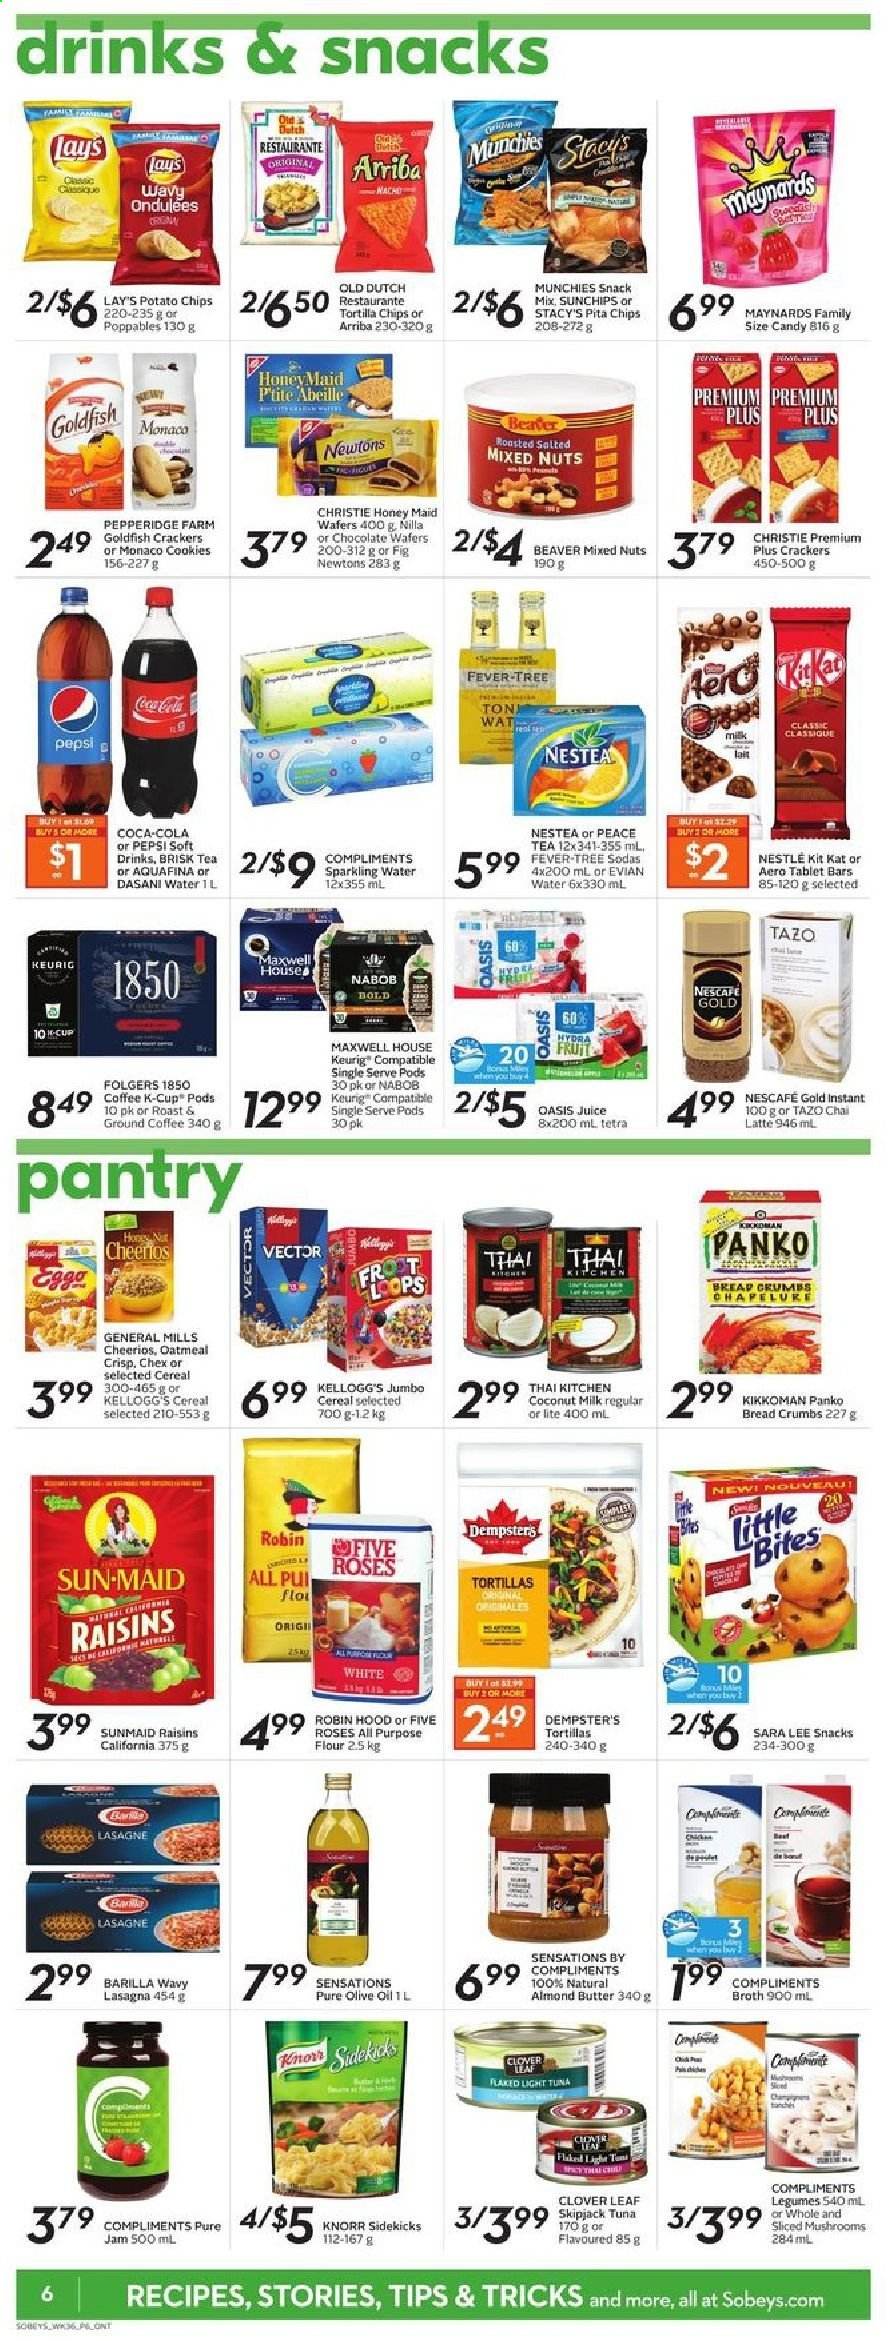 thumbnail - Sobeys Flyer - January 02, 2021 - January 06, 2021 - Sales products - mushrooms, Sara Lee, breadcrumbs, panko breadcrumbs, tuna, Barilla, lasagna meal, Clover, almond butter, cookies, wafers, chocolate wafer, chocolate, KitKat, crackers, Kellogg's, tortilla chips, potato chips, Lay’s, Goldfish, pita chips, oatmeal, broth, coconut milk, light tuna, cereals, Cheerios, Honey Maid, Kikkoman, olive oil, oil, fruit jam, dried fruit, mixed nuts, Coca-Cola, Pepsi, juice, soft drink, Aquafina, sparkling water, Evian, Maxwell House, tea, coffee, Folgers, ground coffee, coffee capsules, K-Cups, Keurig, Knorr, Nestlé, raisins, chips, Nescafé. Page 7.